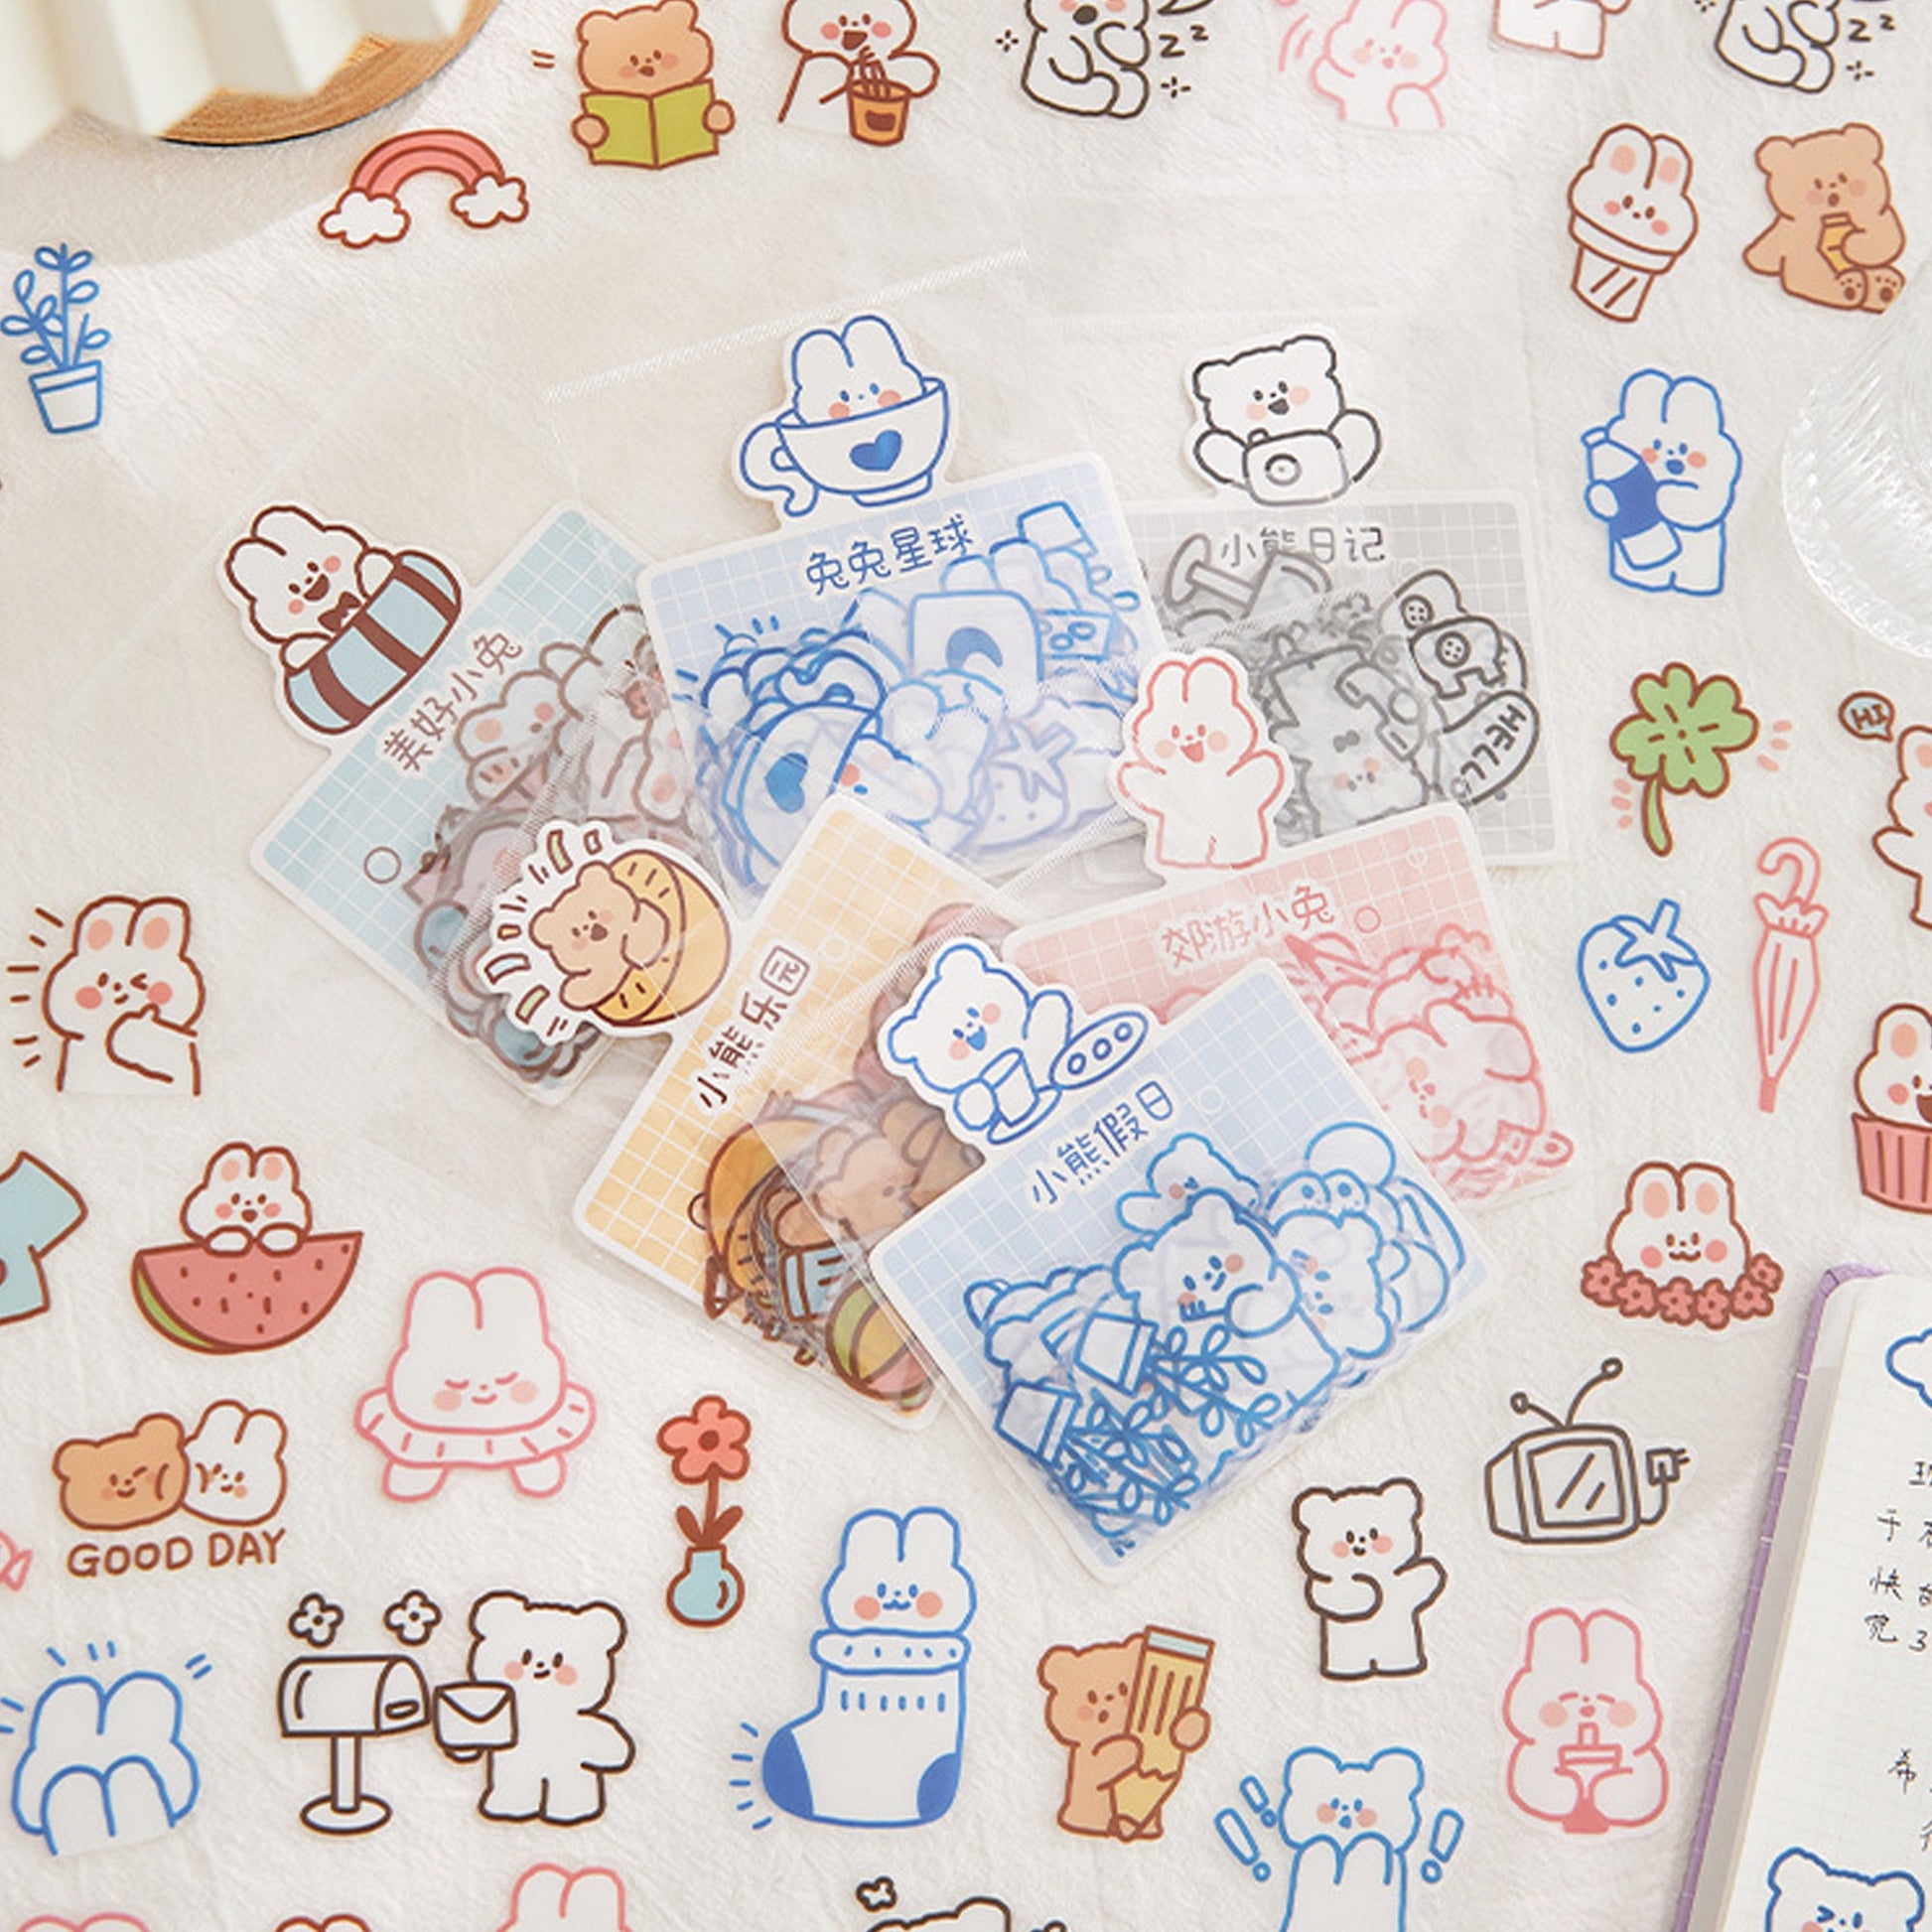 Planner Stickers drawing / Cute Journal Stickers / 